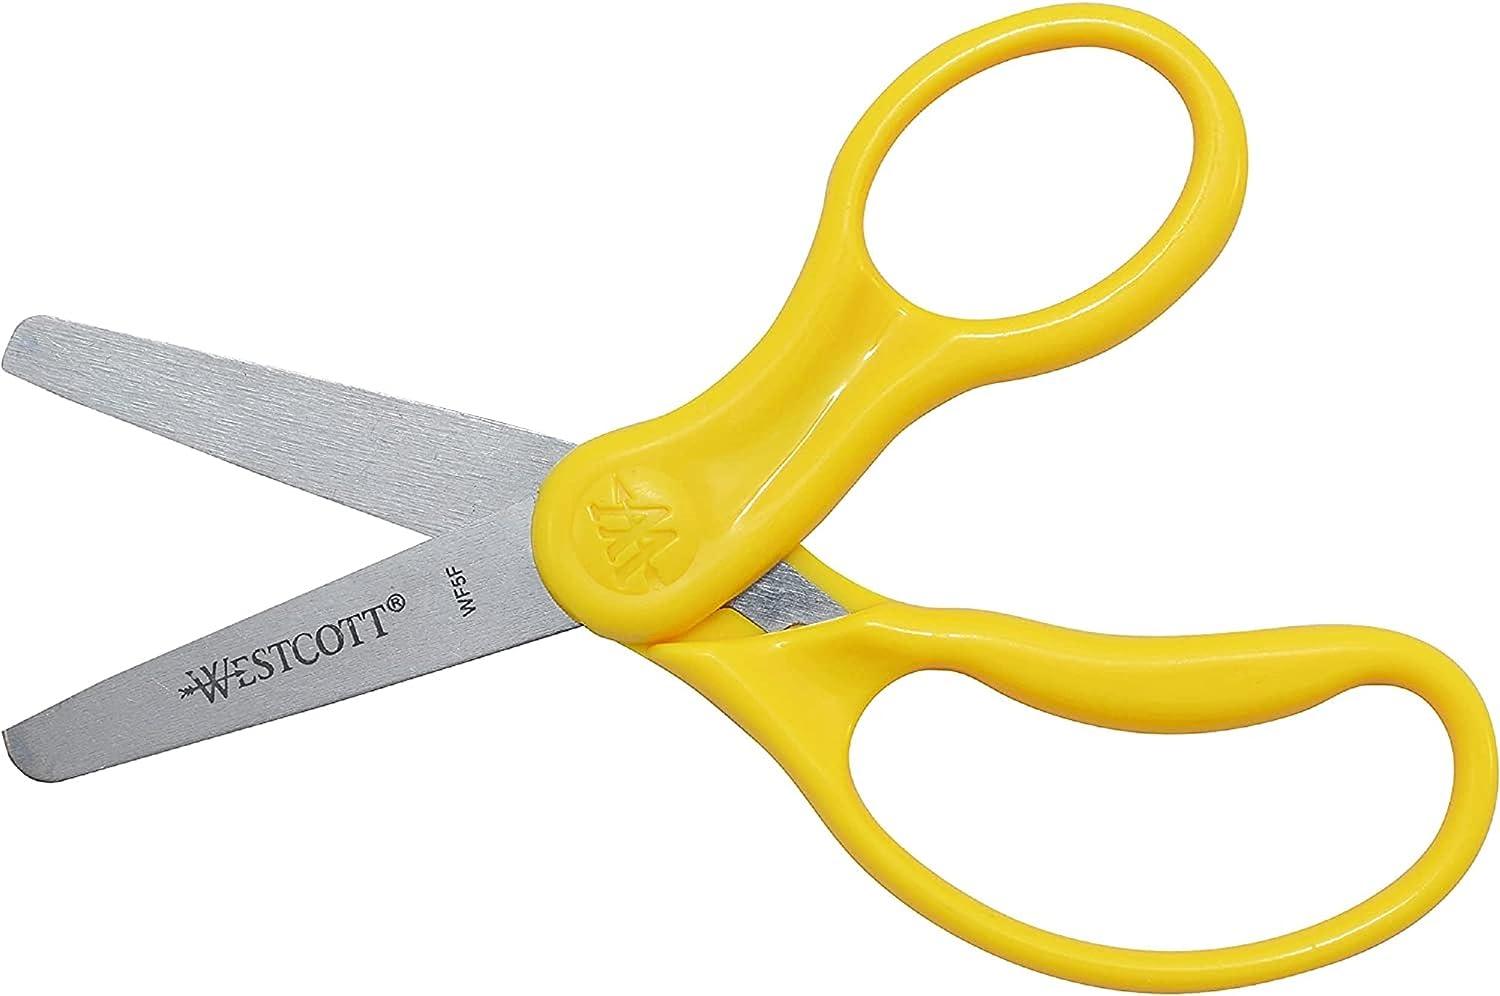 Westcott 13140 Right- and Left-Handed Scissors, Kids' Scissors, Ages 4-8,  5-Inch Blunt Tip, Assorted, 12 Pack